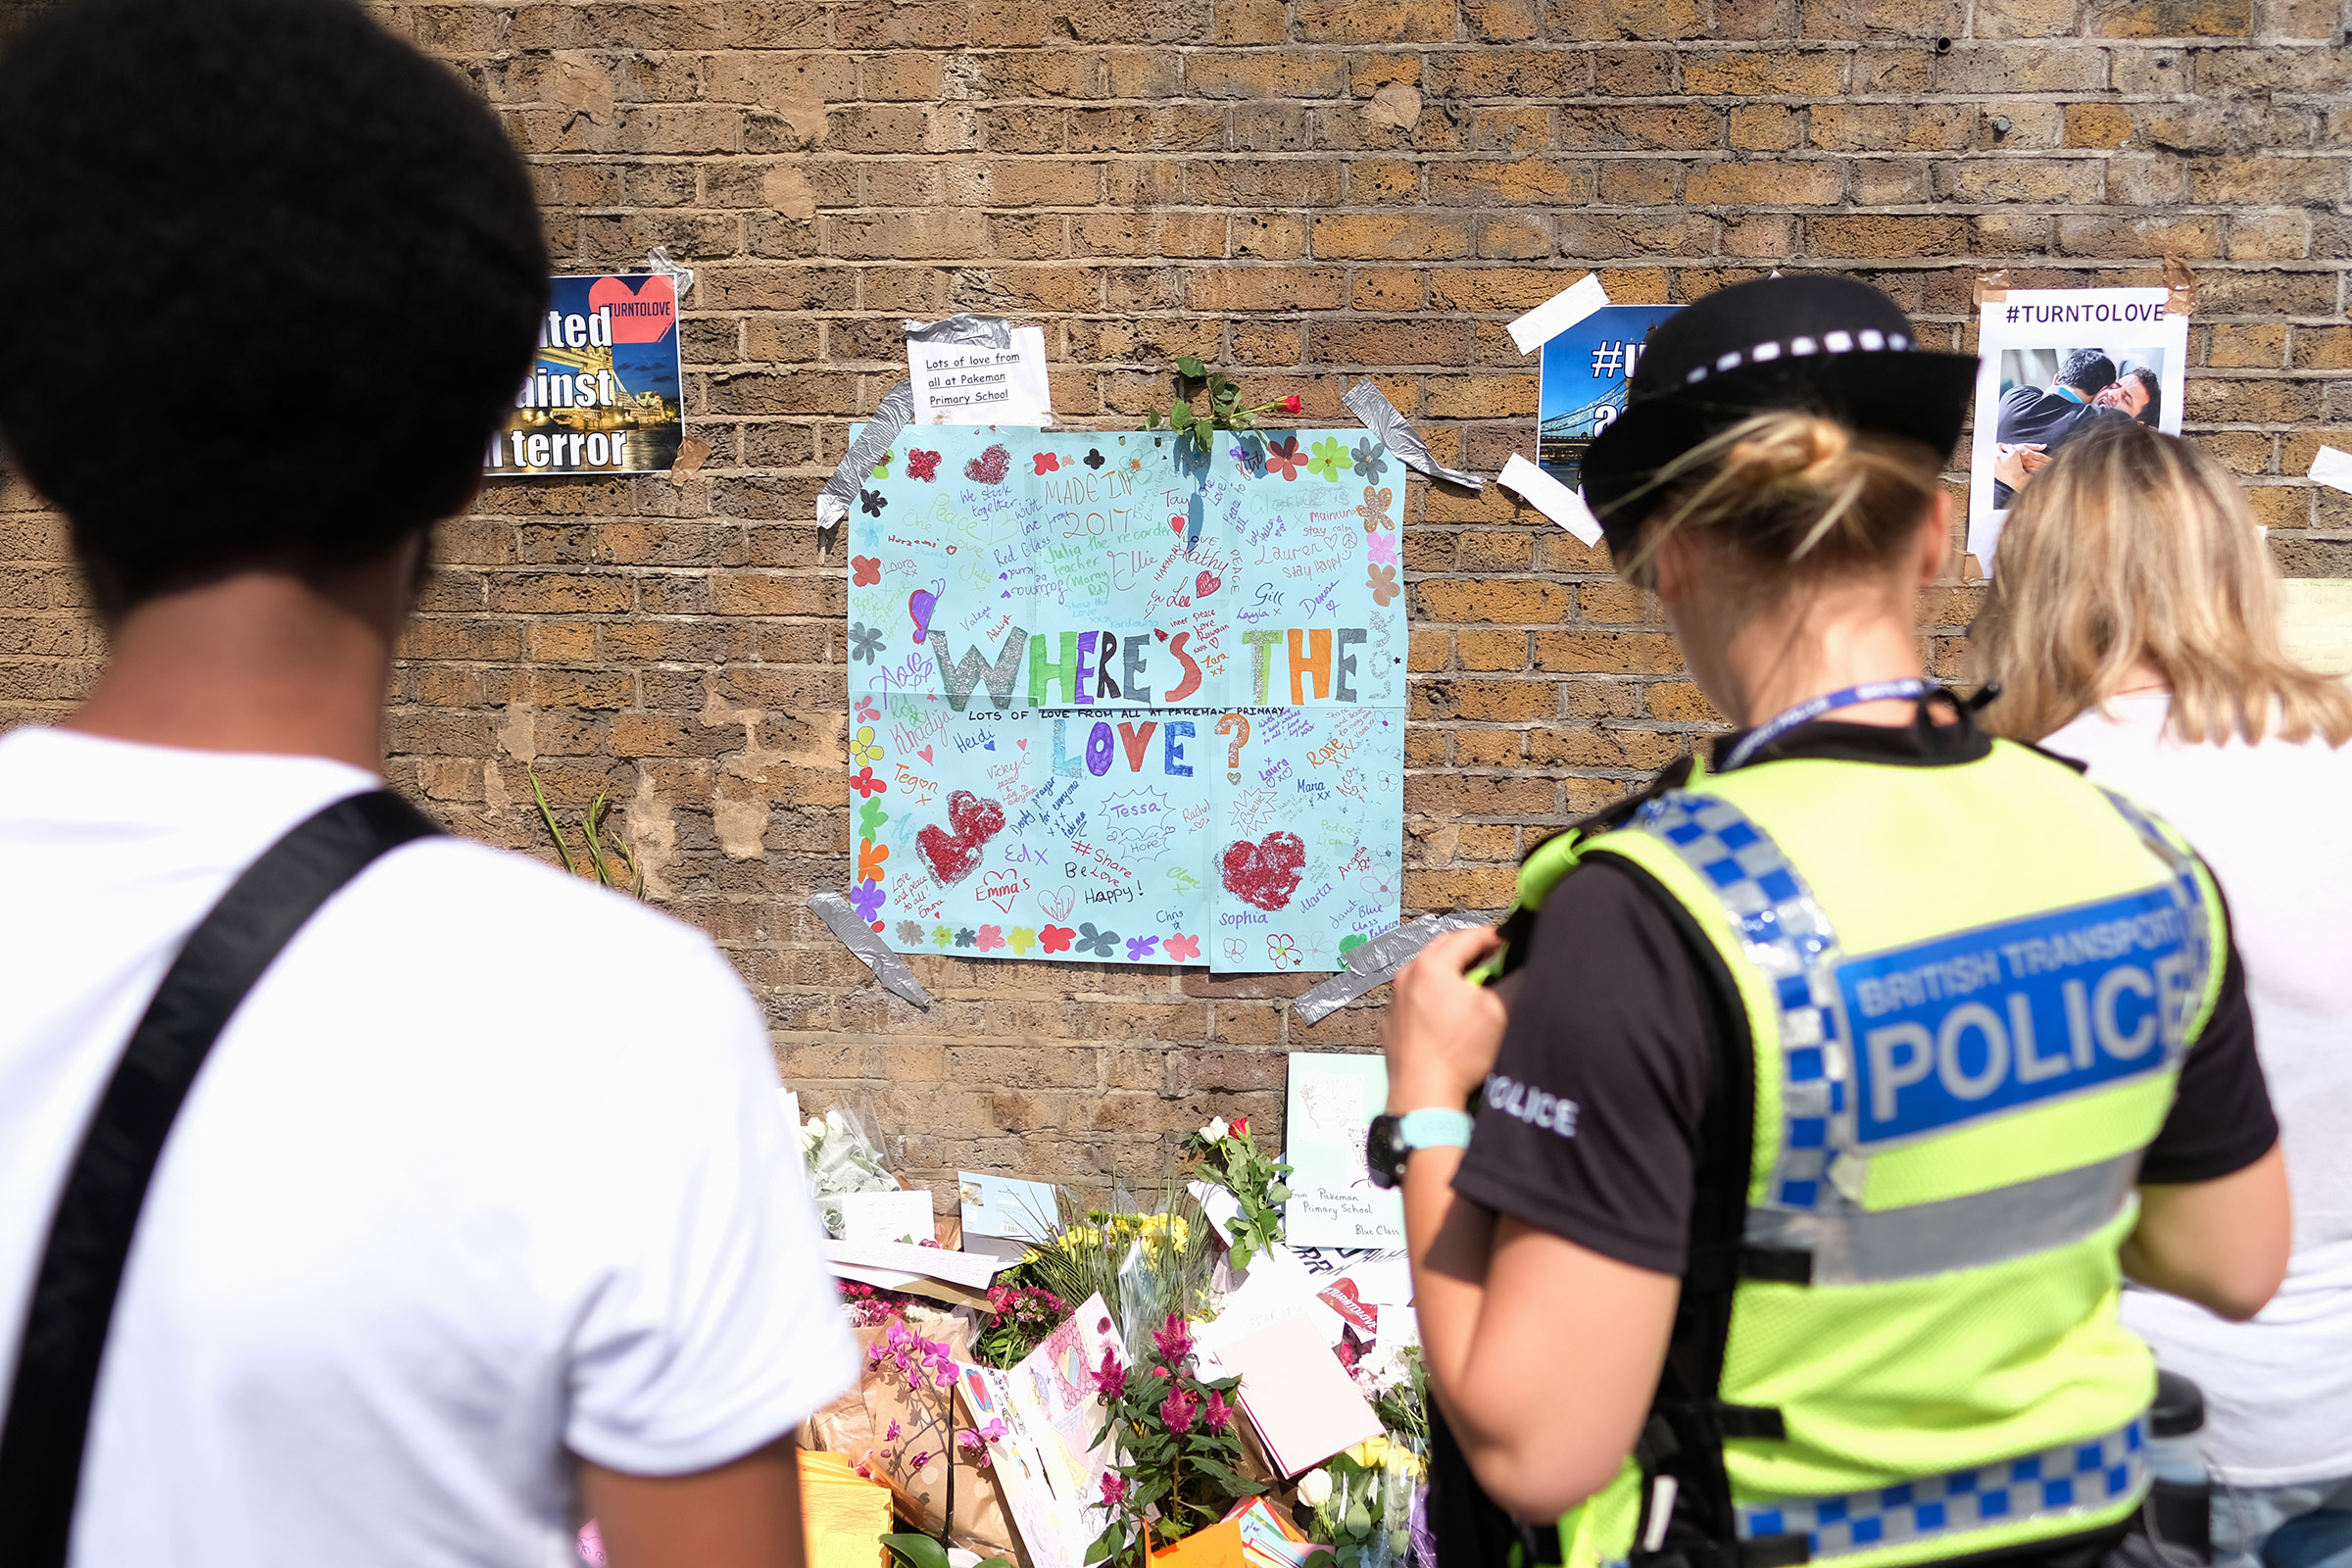 People stop to read some of the messages of support and love for the Muslim community near Finsbury Mosque on June 20, 2017 in London. A man was held on suspicion of attempted murder and alleged terror offenses after a group of Muslims were hit by a van in Finsbury Park. (Leon Neal—Getty Images)